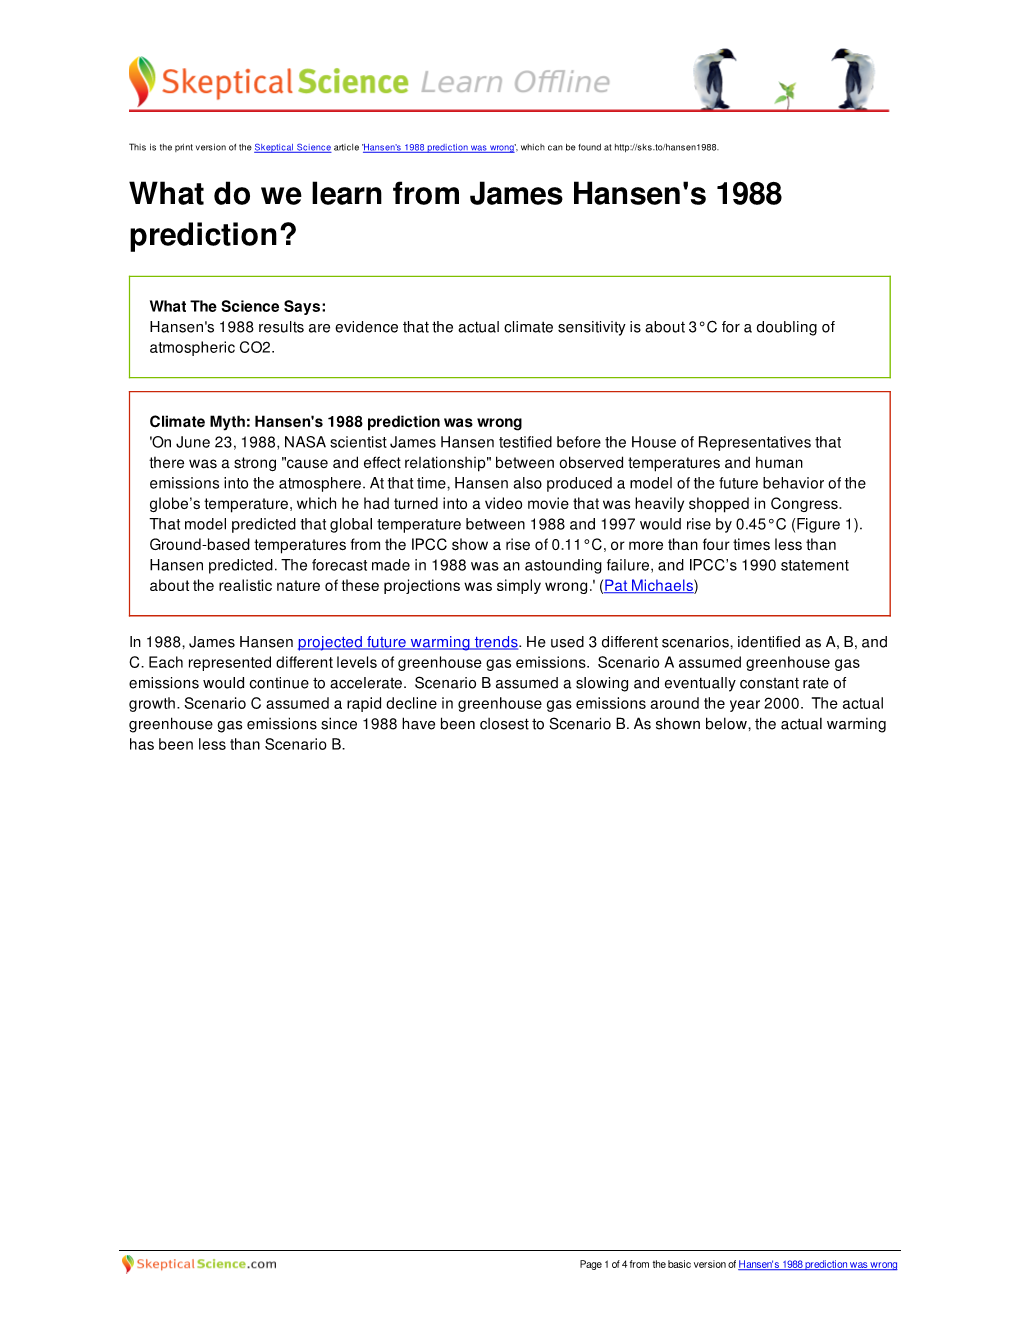 What Do We Learn from James Hansen's 1988 Prediction?